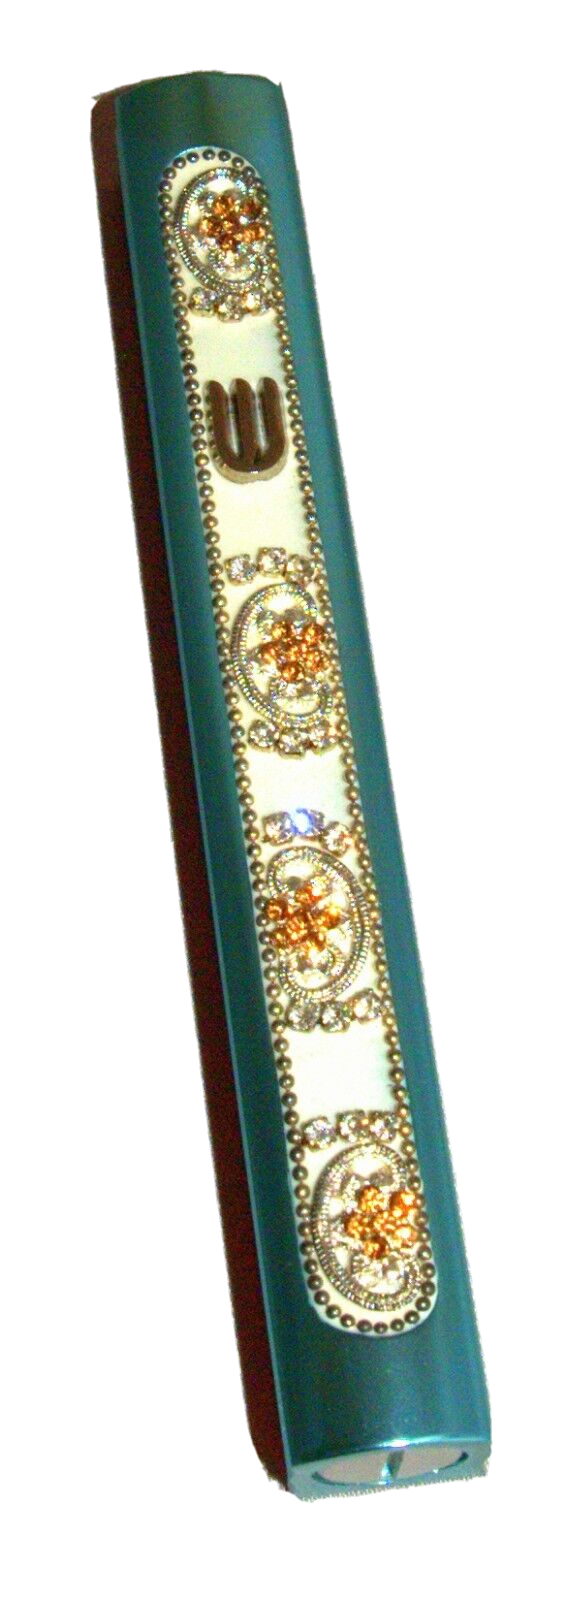 Judaica Mezuzah Case Turquoise Gold Crystals Slim Closed Back Bling 10 cm Scroll